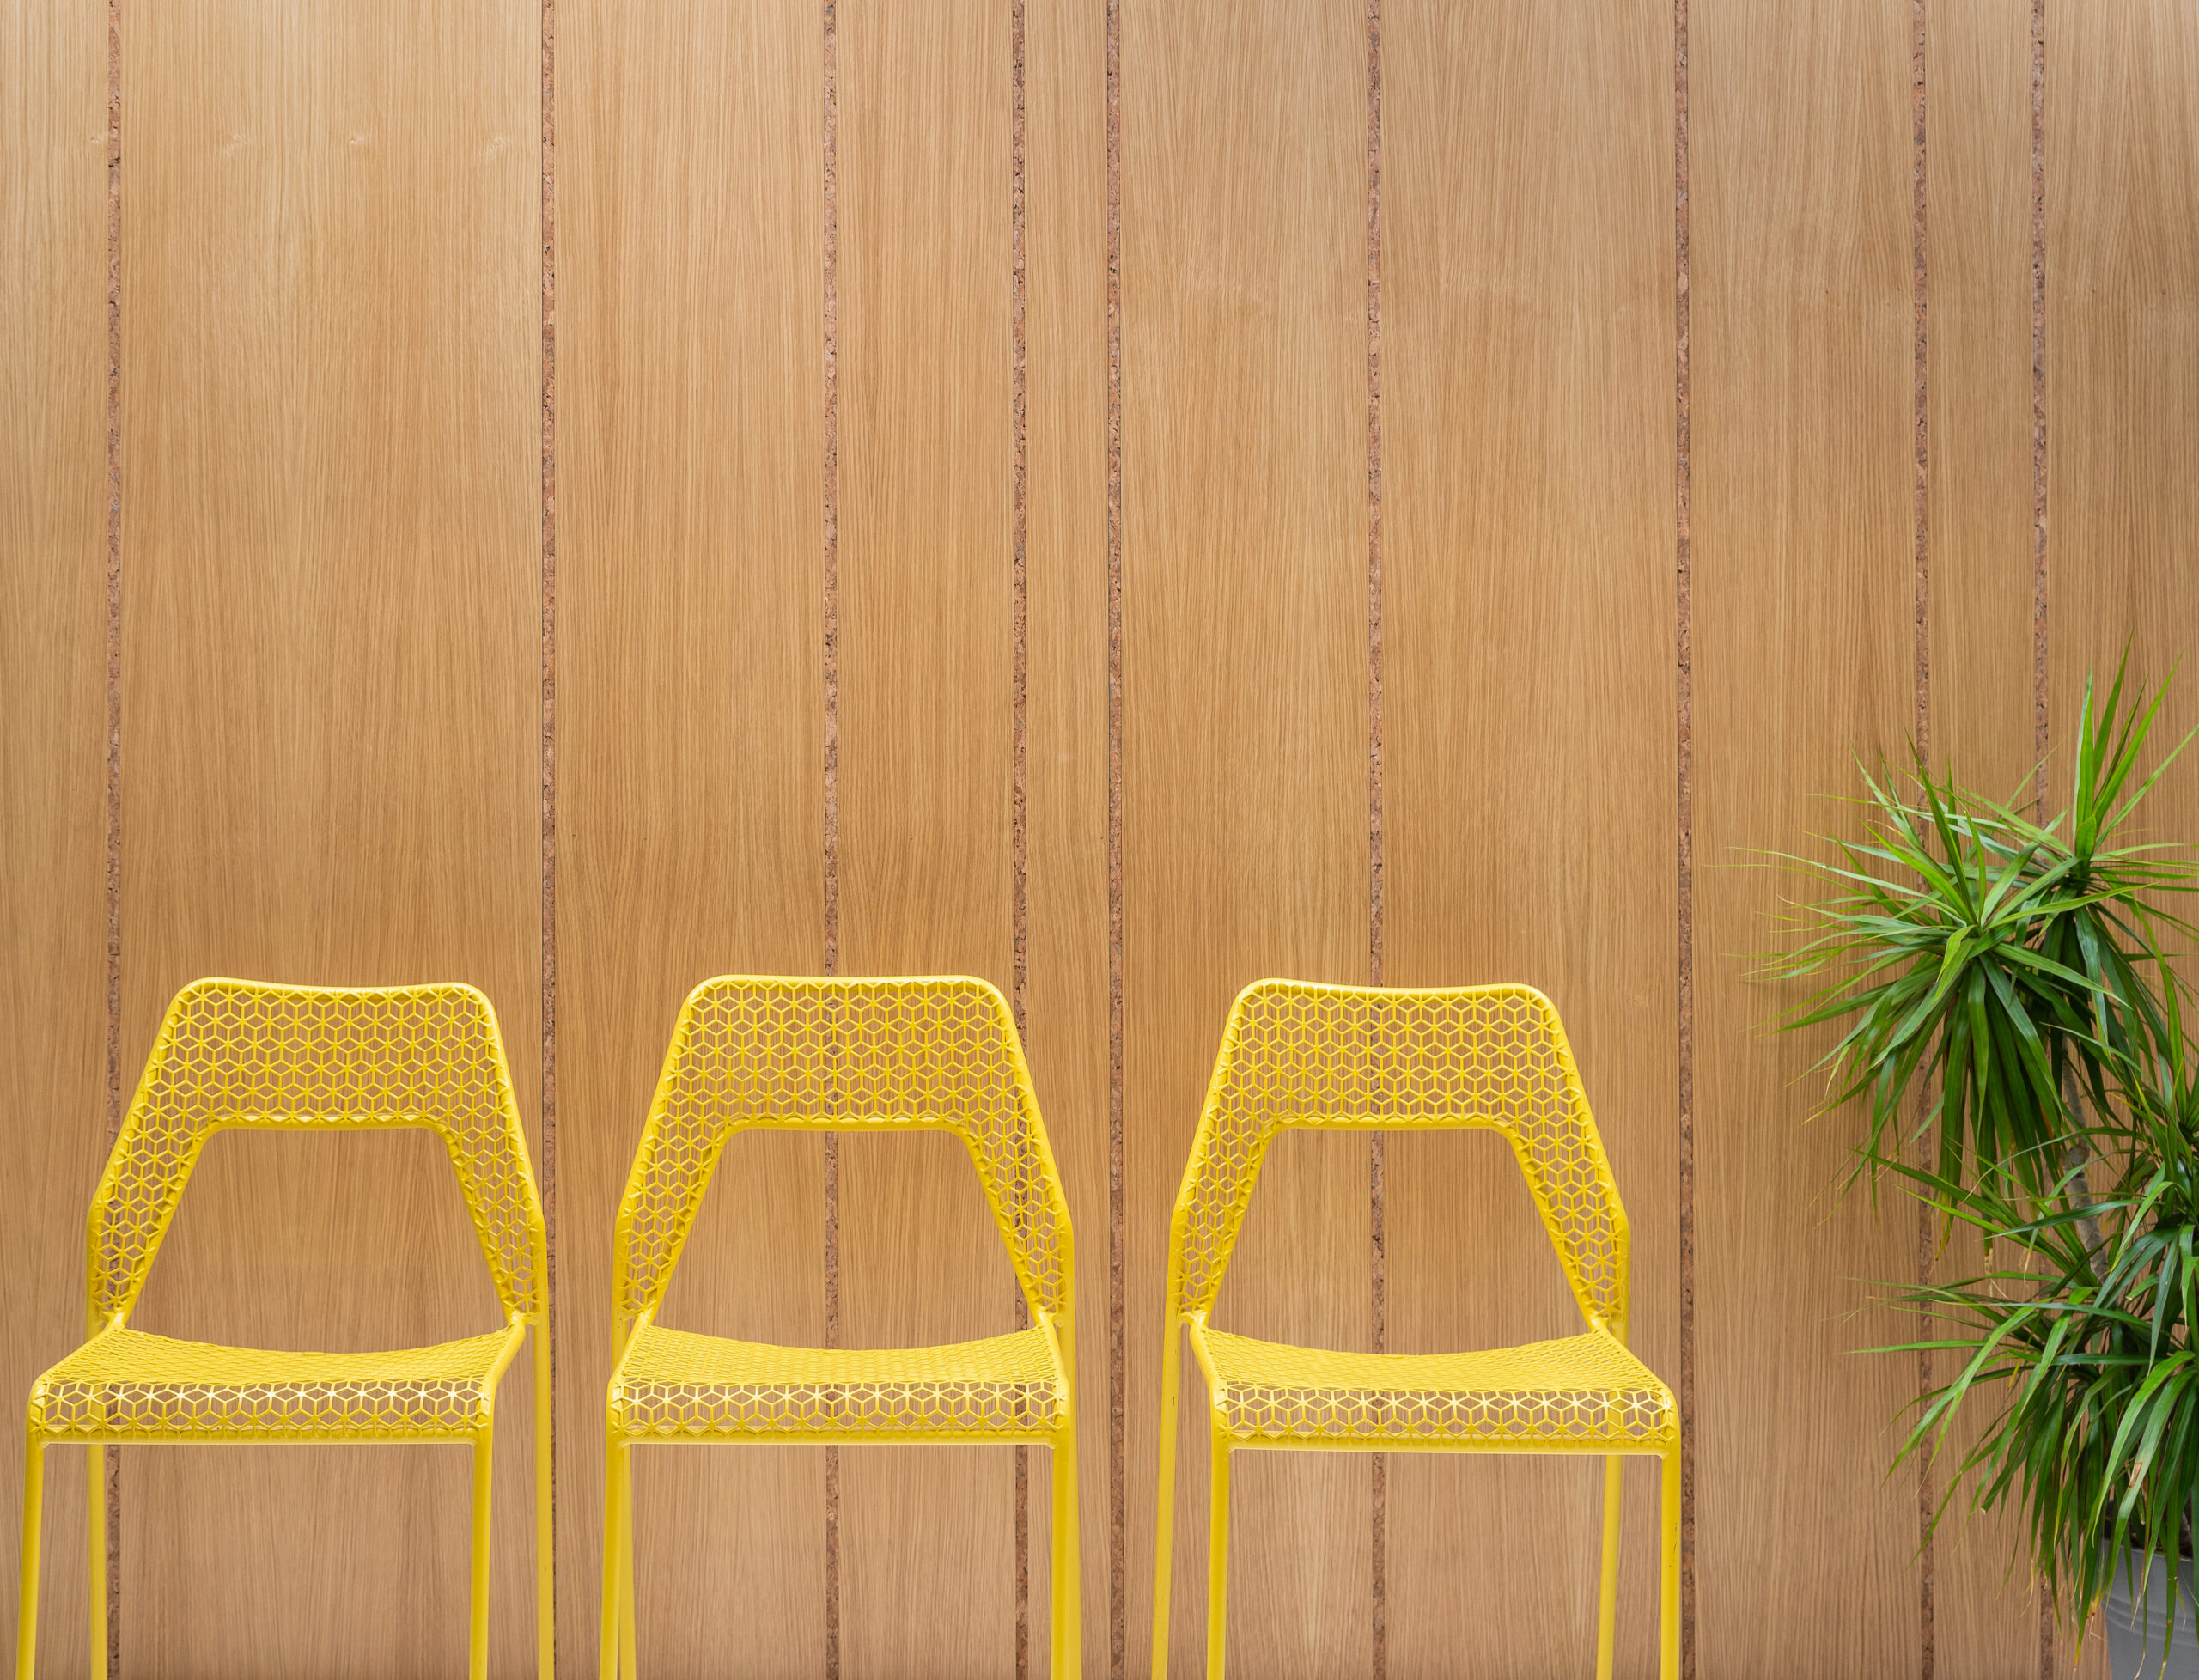 An oak wood wall with long vertical lines of inlaid cork. In front of the wall are three yellow Blu Dot wire chairs and a spiky palm plant.